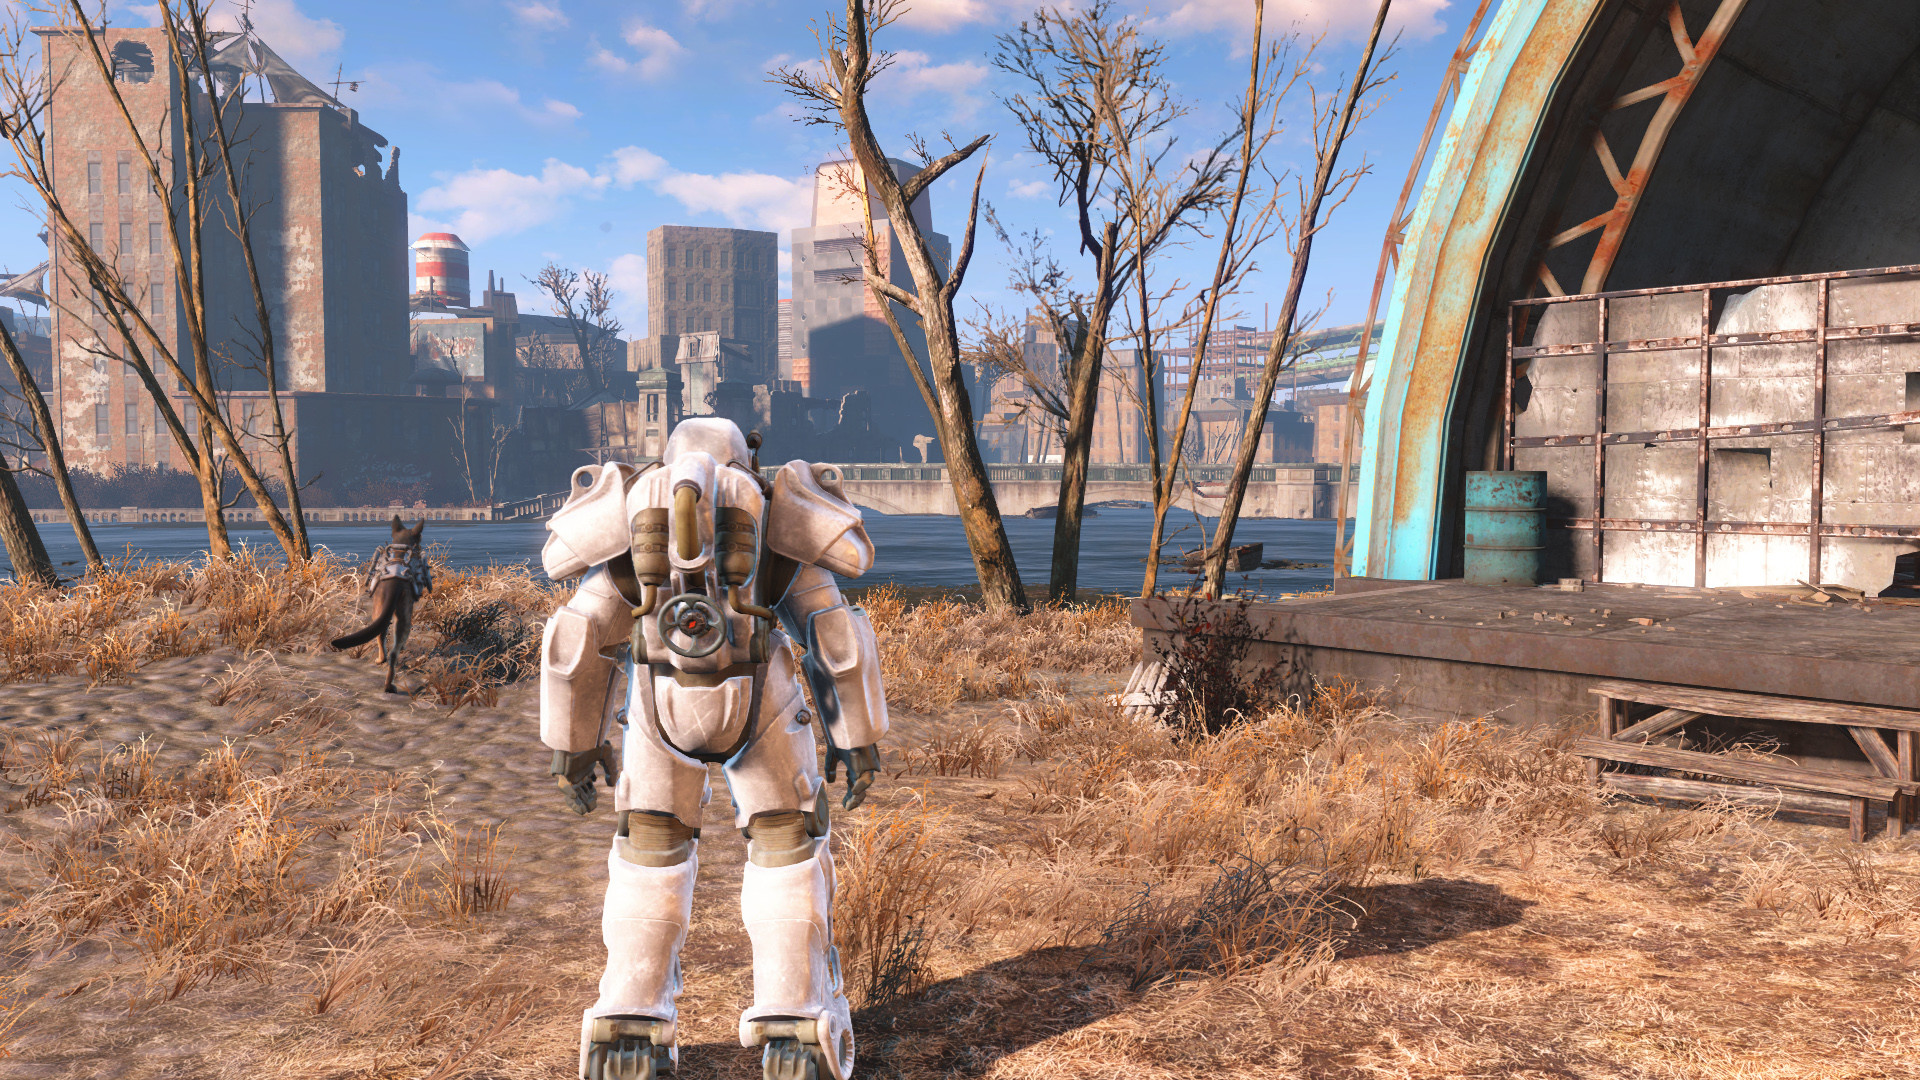 1920x1080 Knights Templar - T60 Power Armor at Fallout 4 Nexus - Mods and community